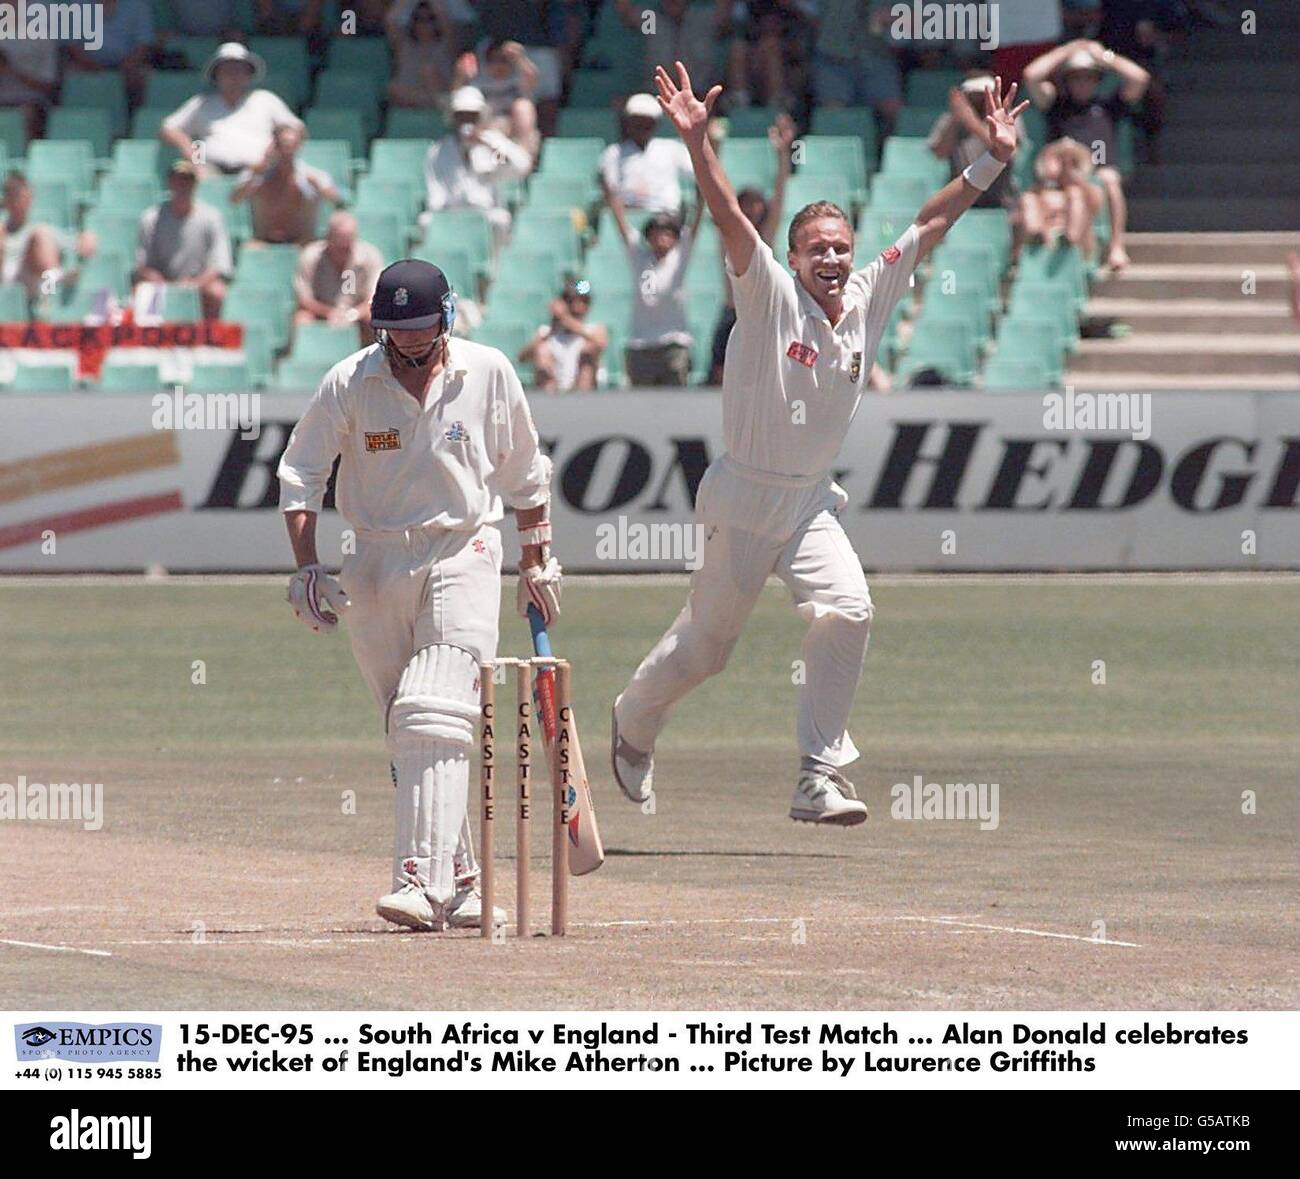 15-DEC-95. South Africa v England - Third Test Match. Allan Donald celebrates the wicket of England's Mike Atherton. Picture by Laurence Griffiths Stock Photo